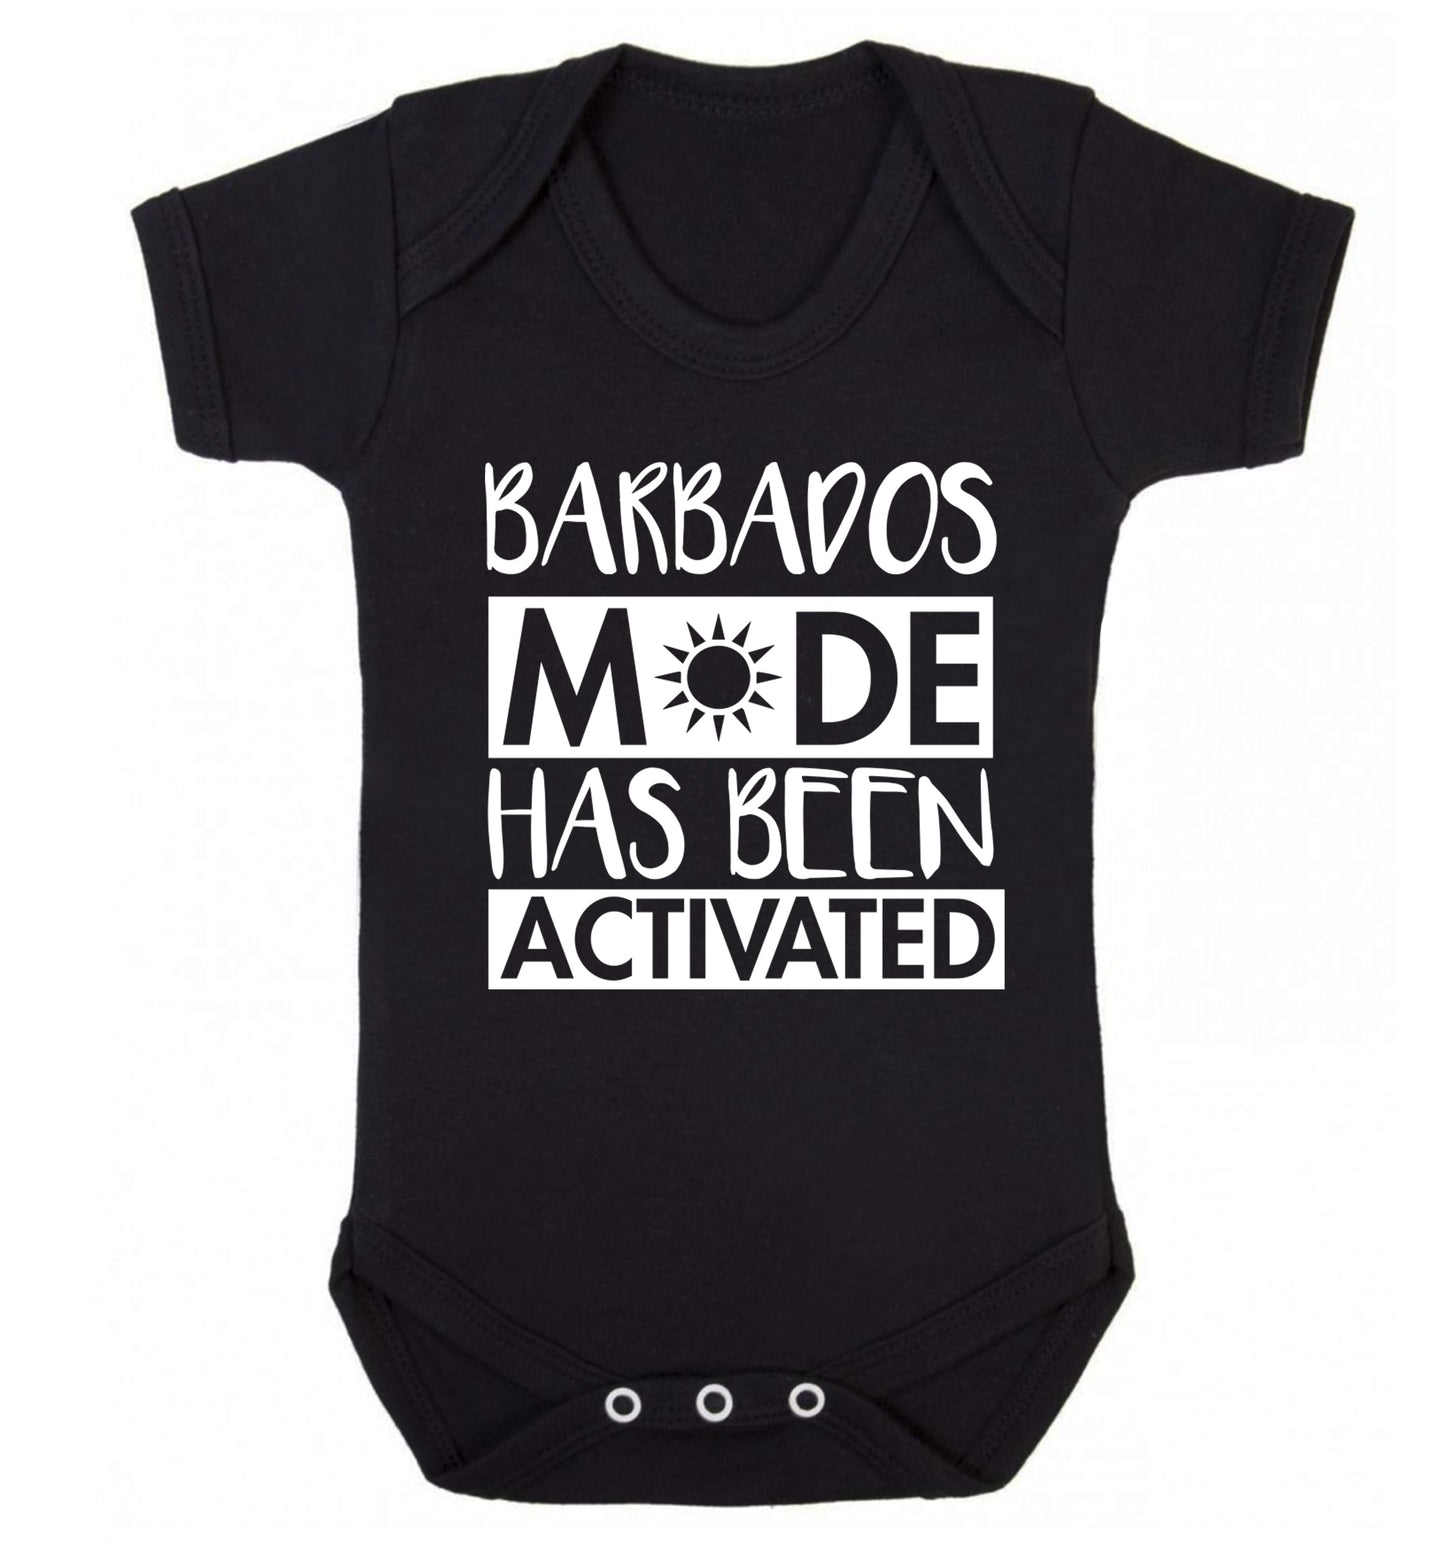 Barbados mode has been activated Baby Vest black 18-24 months